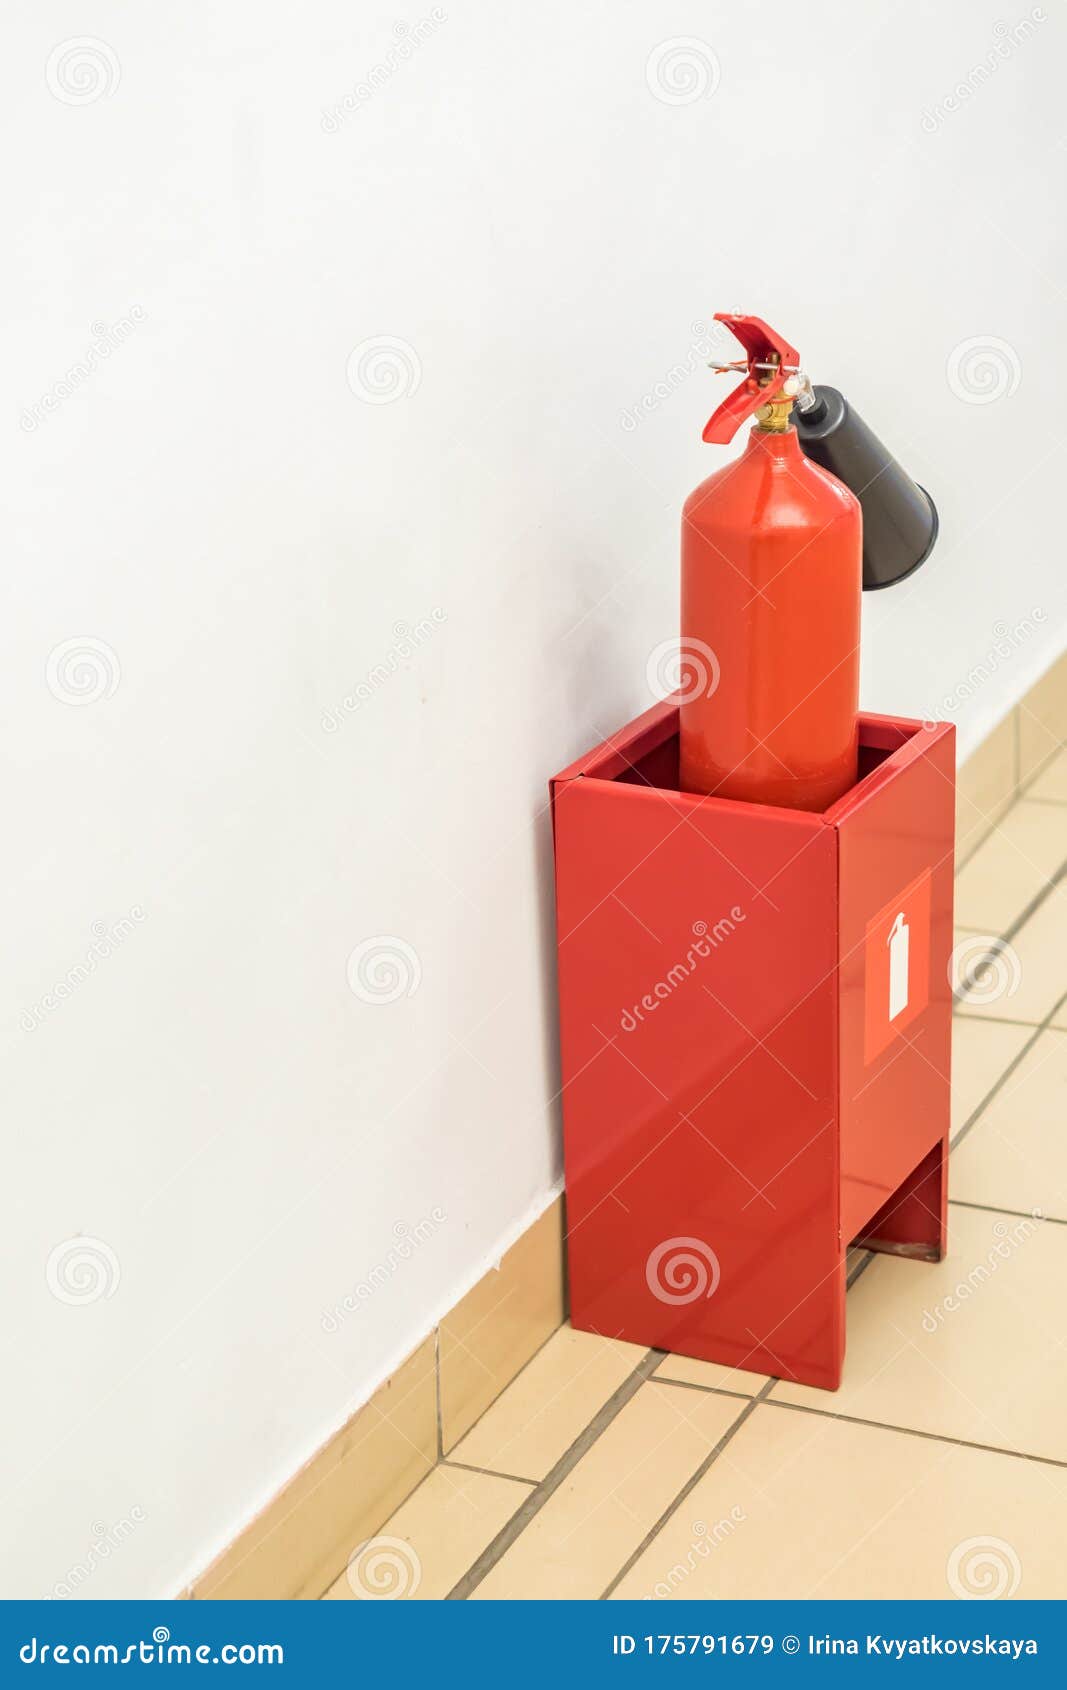 Fire Extinguisher Near The Wall Indoors Stock Image ...